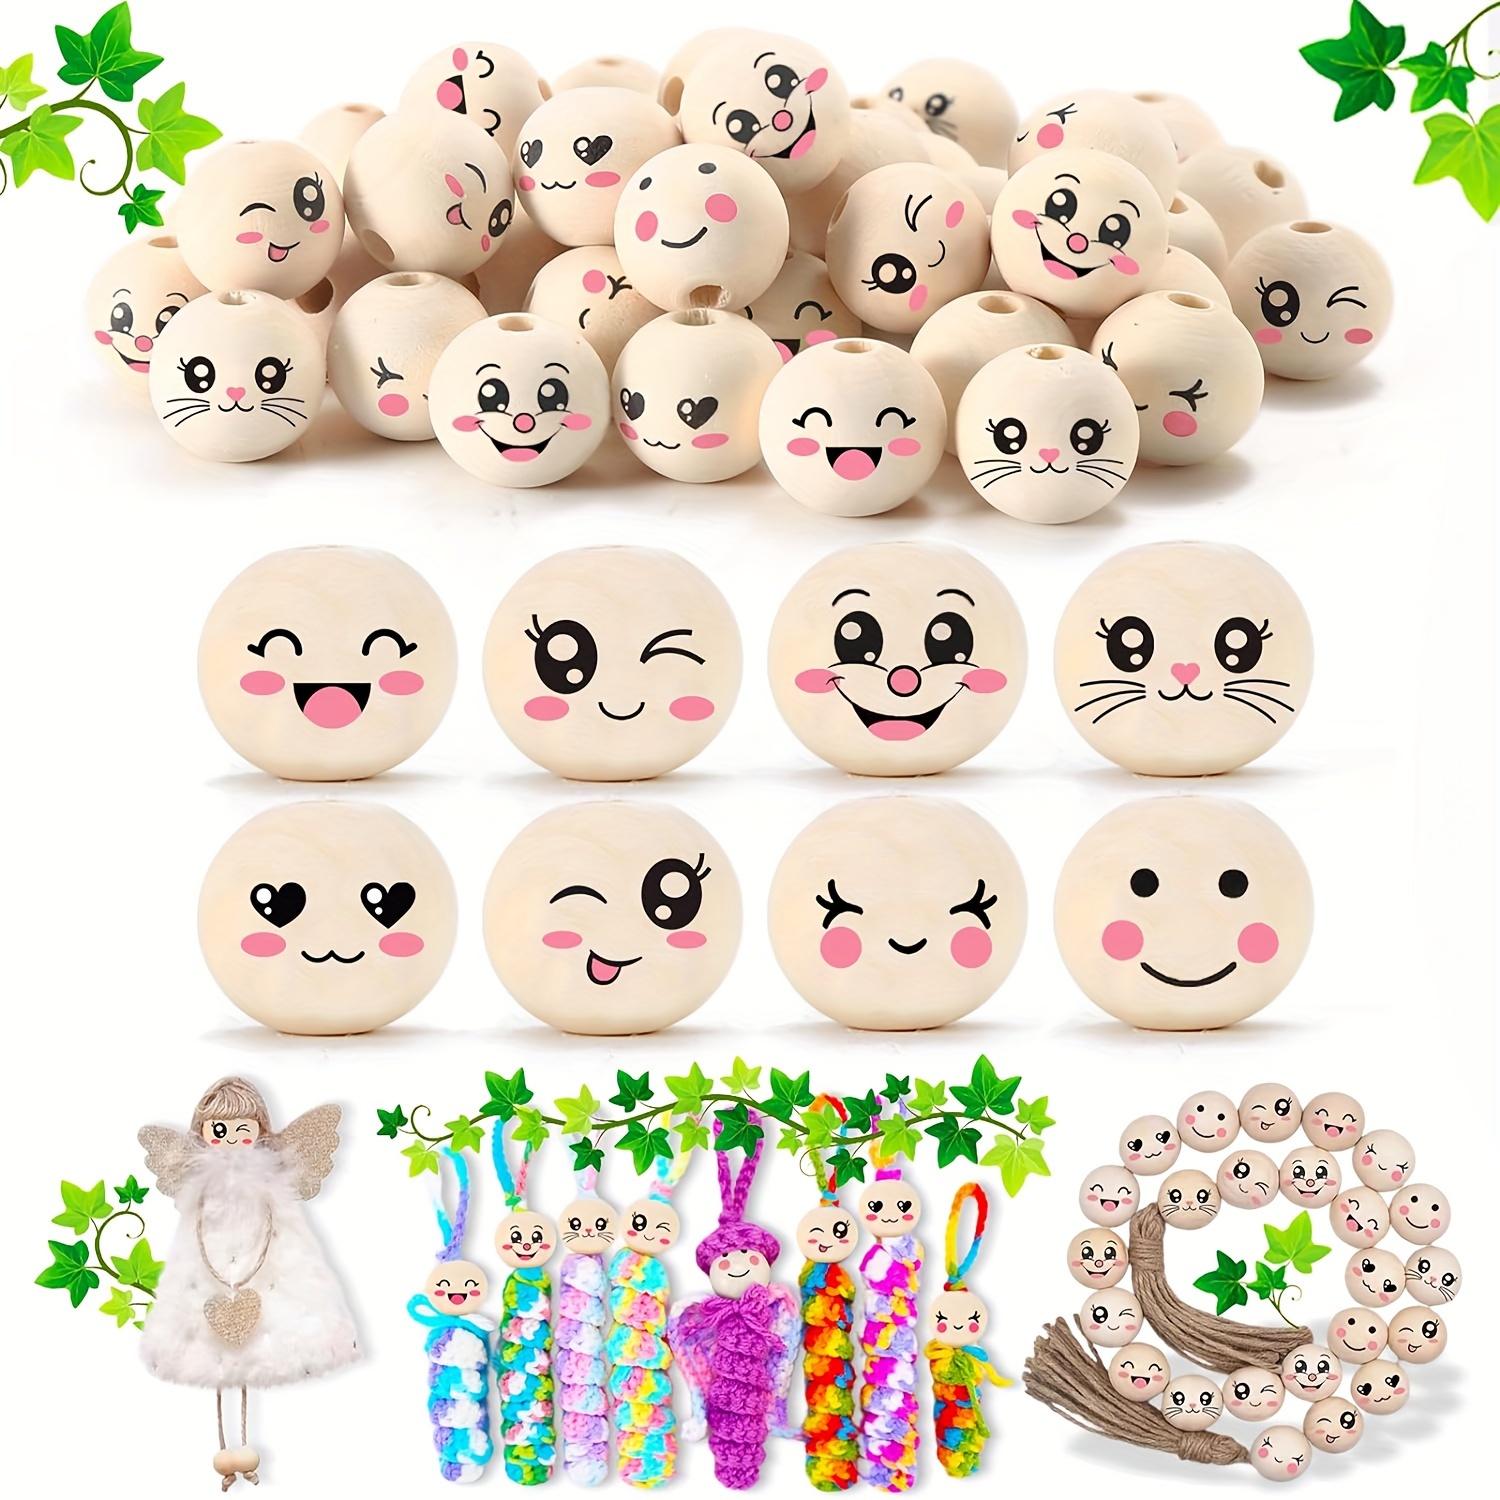 

40 Pcs 8 Styles Wooden Beads, Cute Facial Expression Pattern Wooden Beads, Smile Face Wooden Beads With Hole, For Diy Crafting Crochet Craft Keychain, 20mm/0.78in